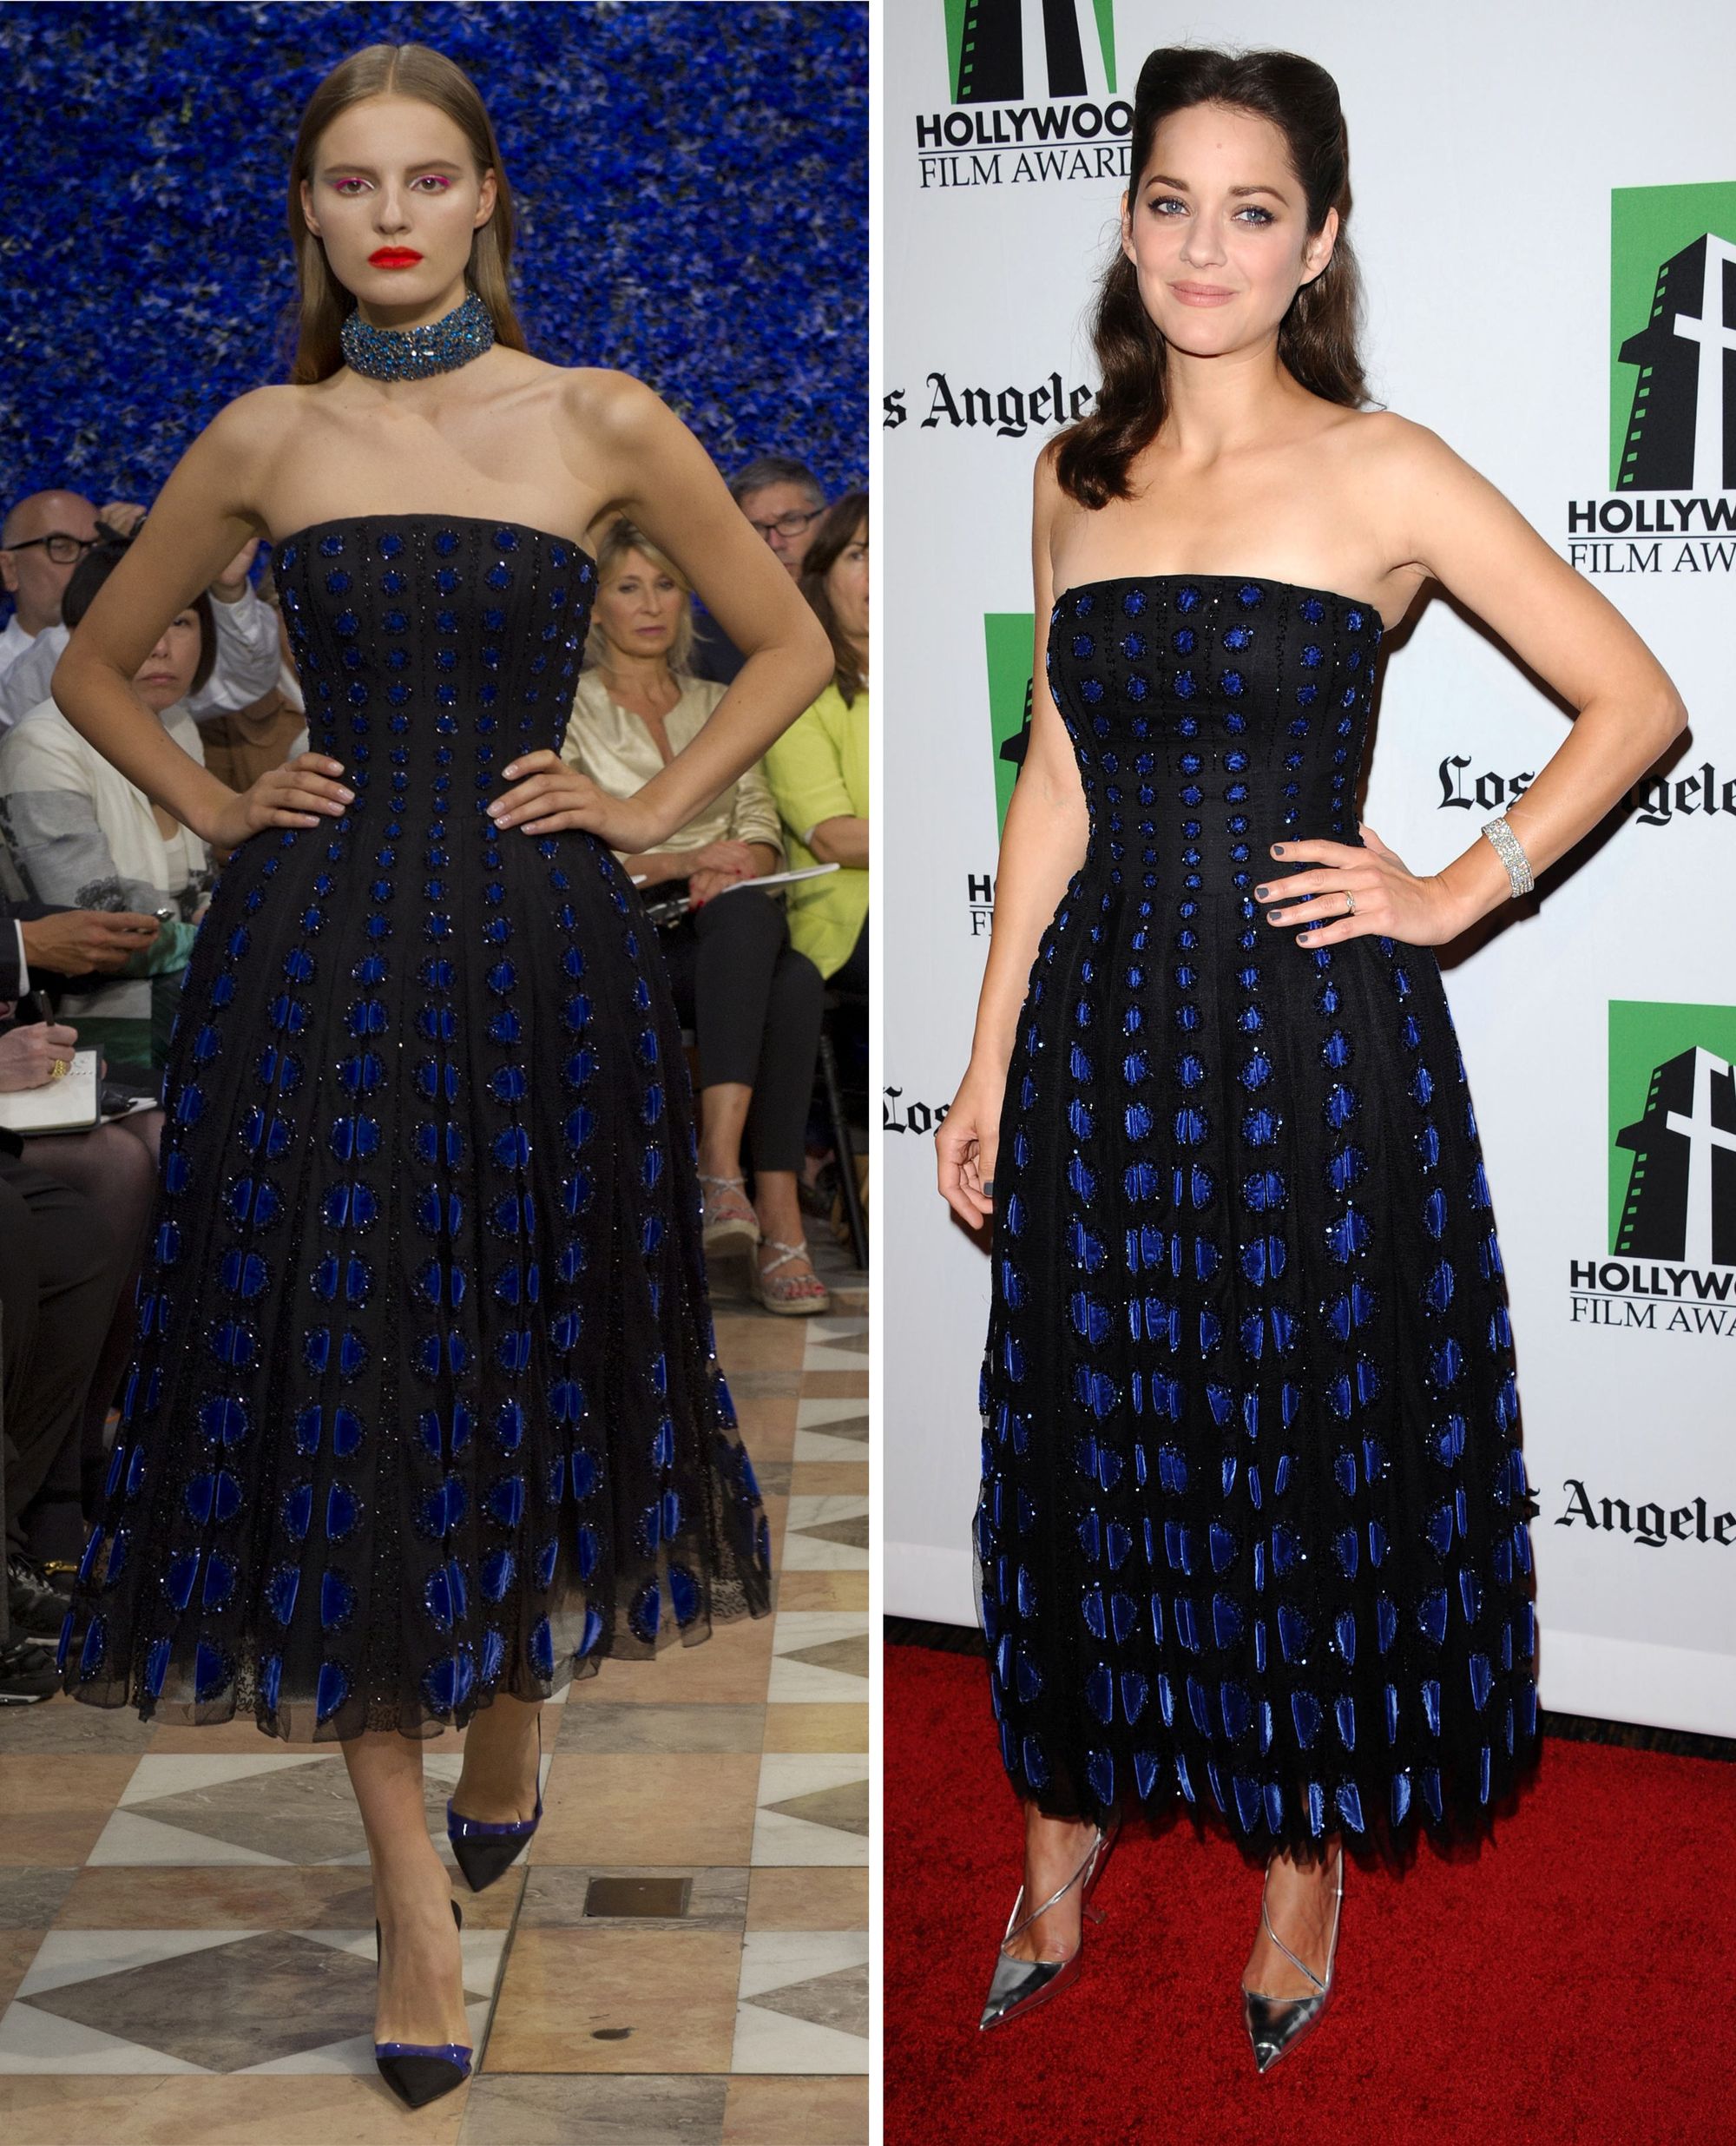 Marion Cotillard in Christian Dior Autumn 2012 Couture at the 16th Annual Hollywood Film Awards Gala on October 22, 2012